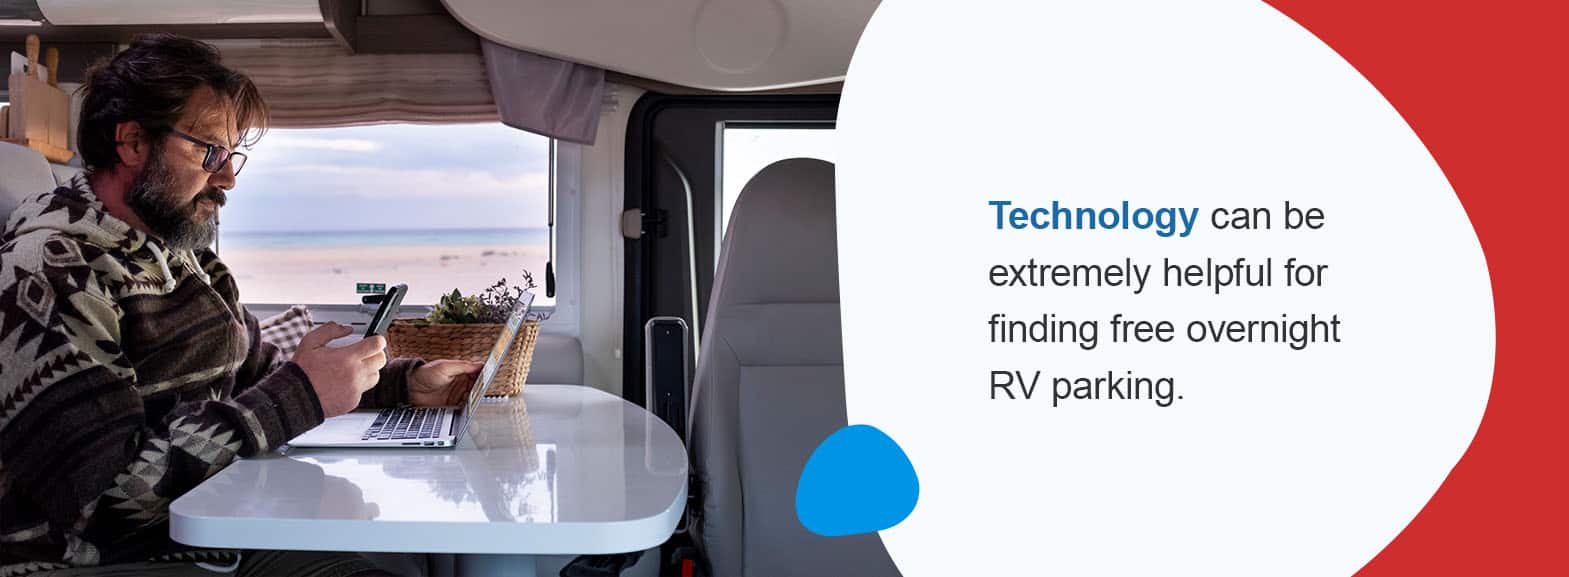 Technology can be extremely helpful for finding free overnight RV parking.